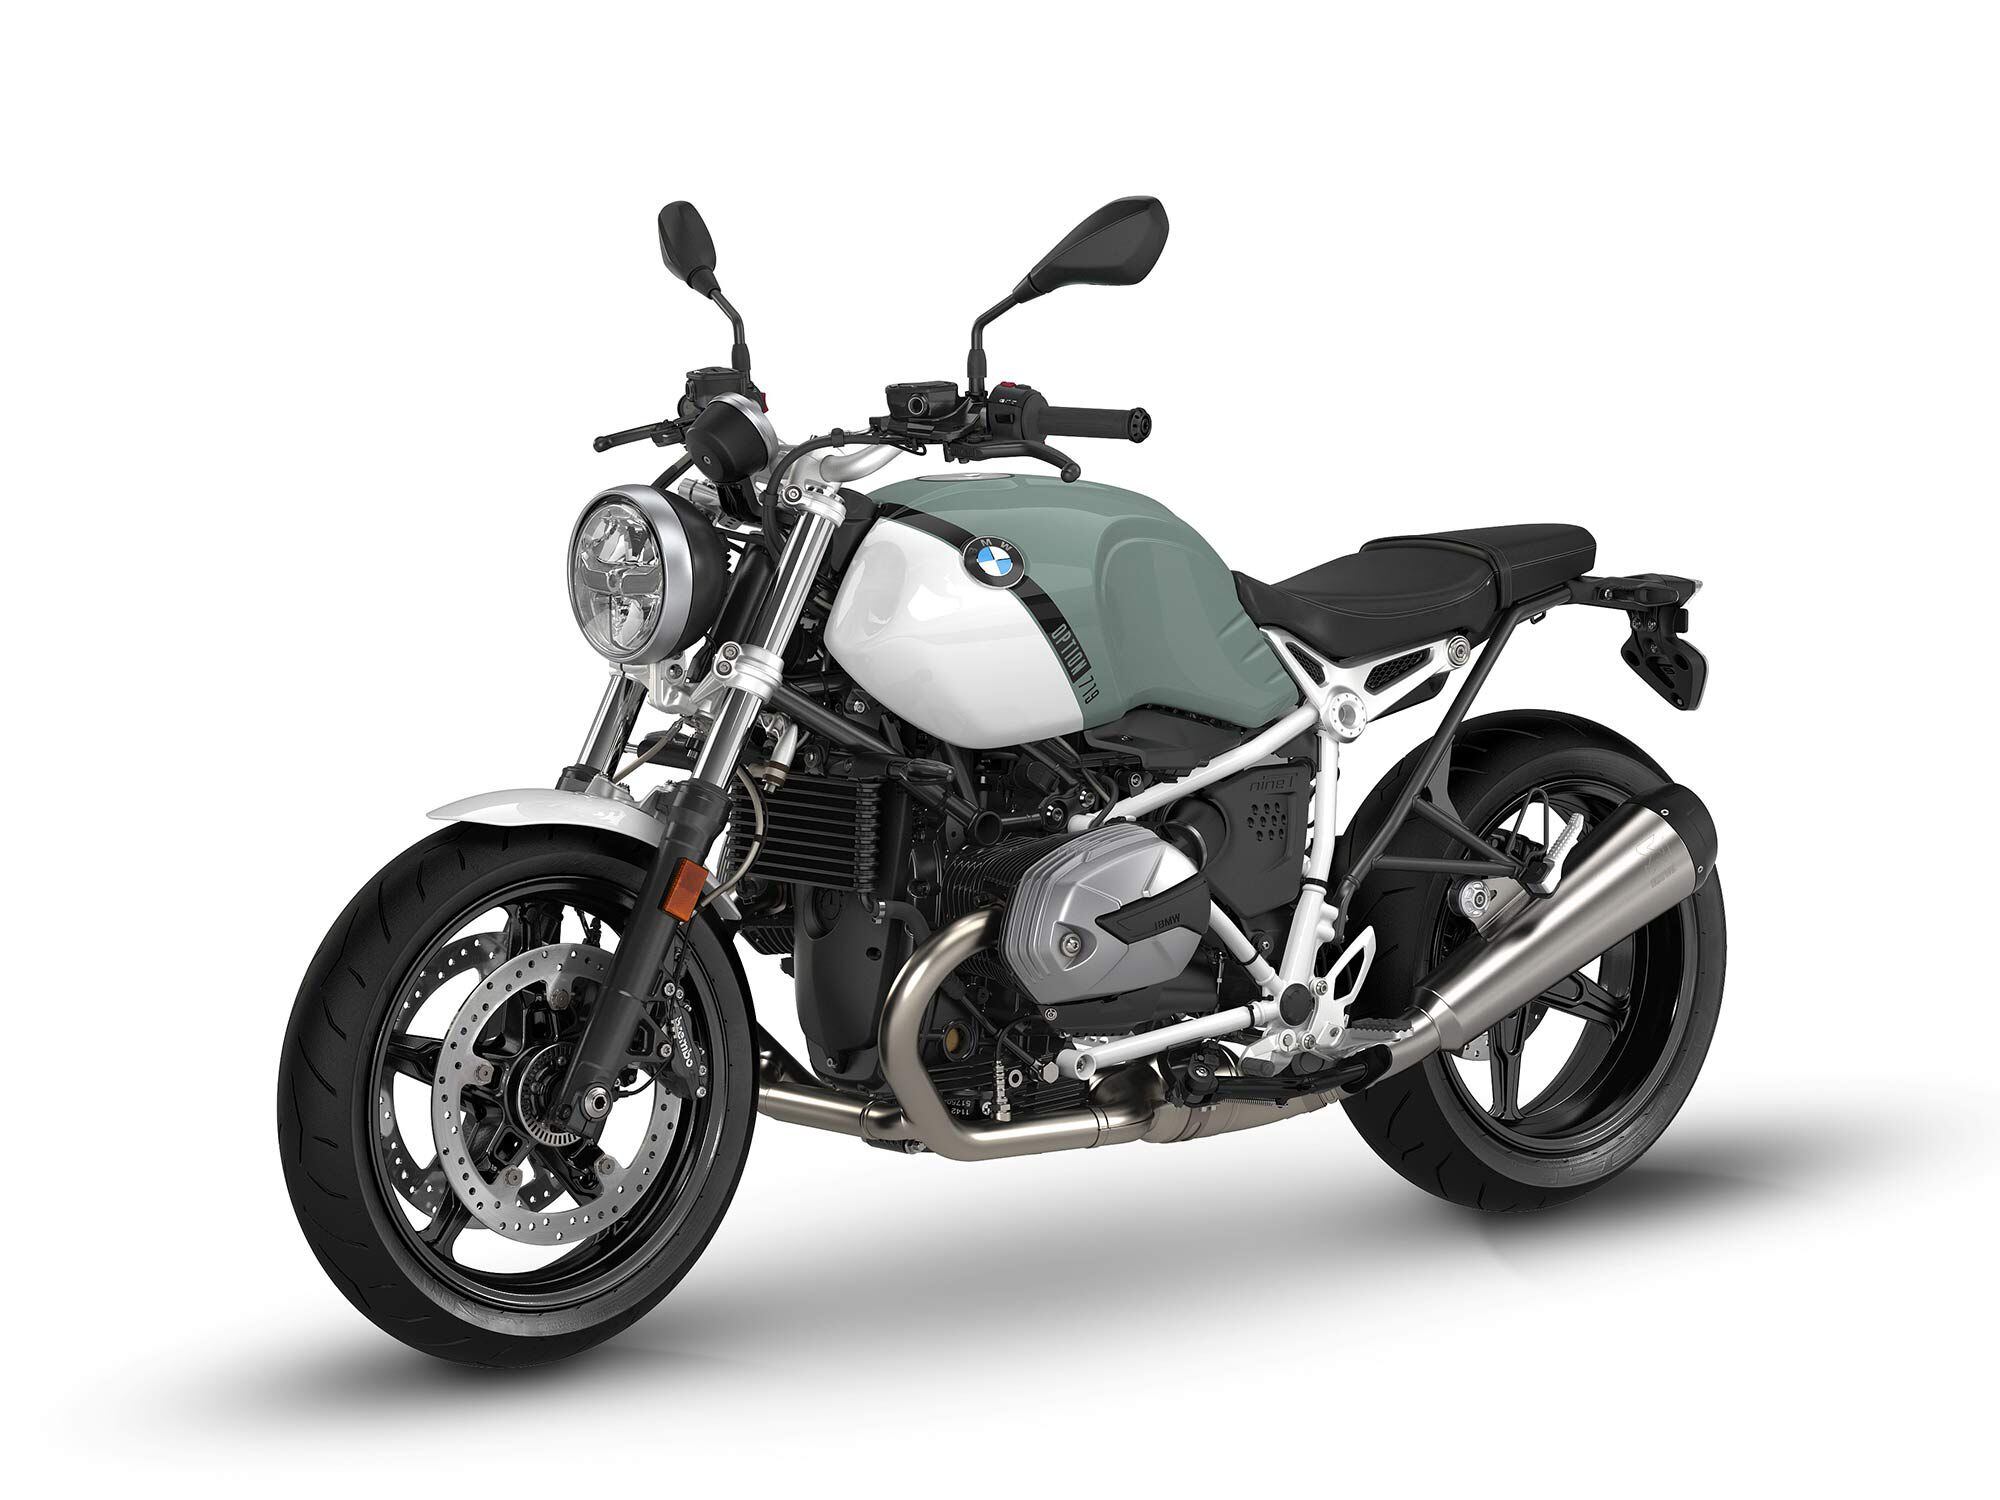 The 2023 R nineT Pure also returns unchanged and is still the lowest priced in the R nineT series. Here it is in Option 719 Underground/Light White.